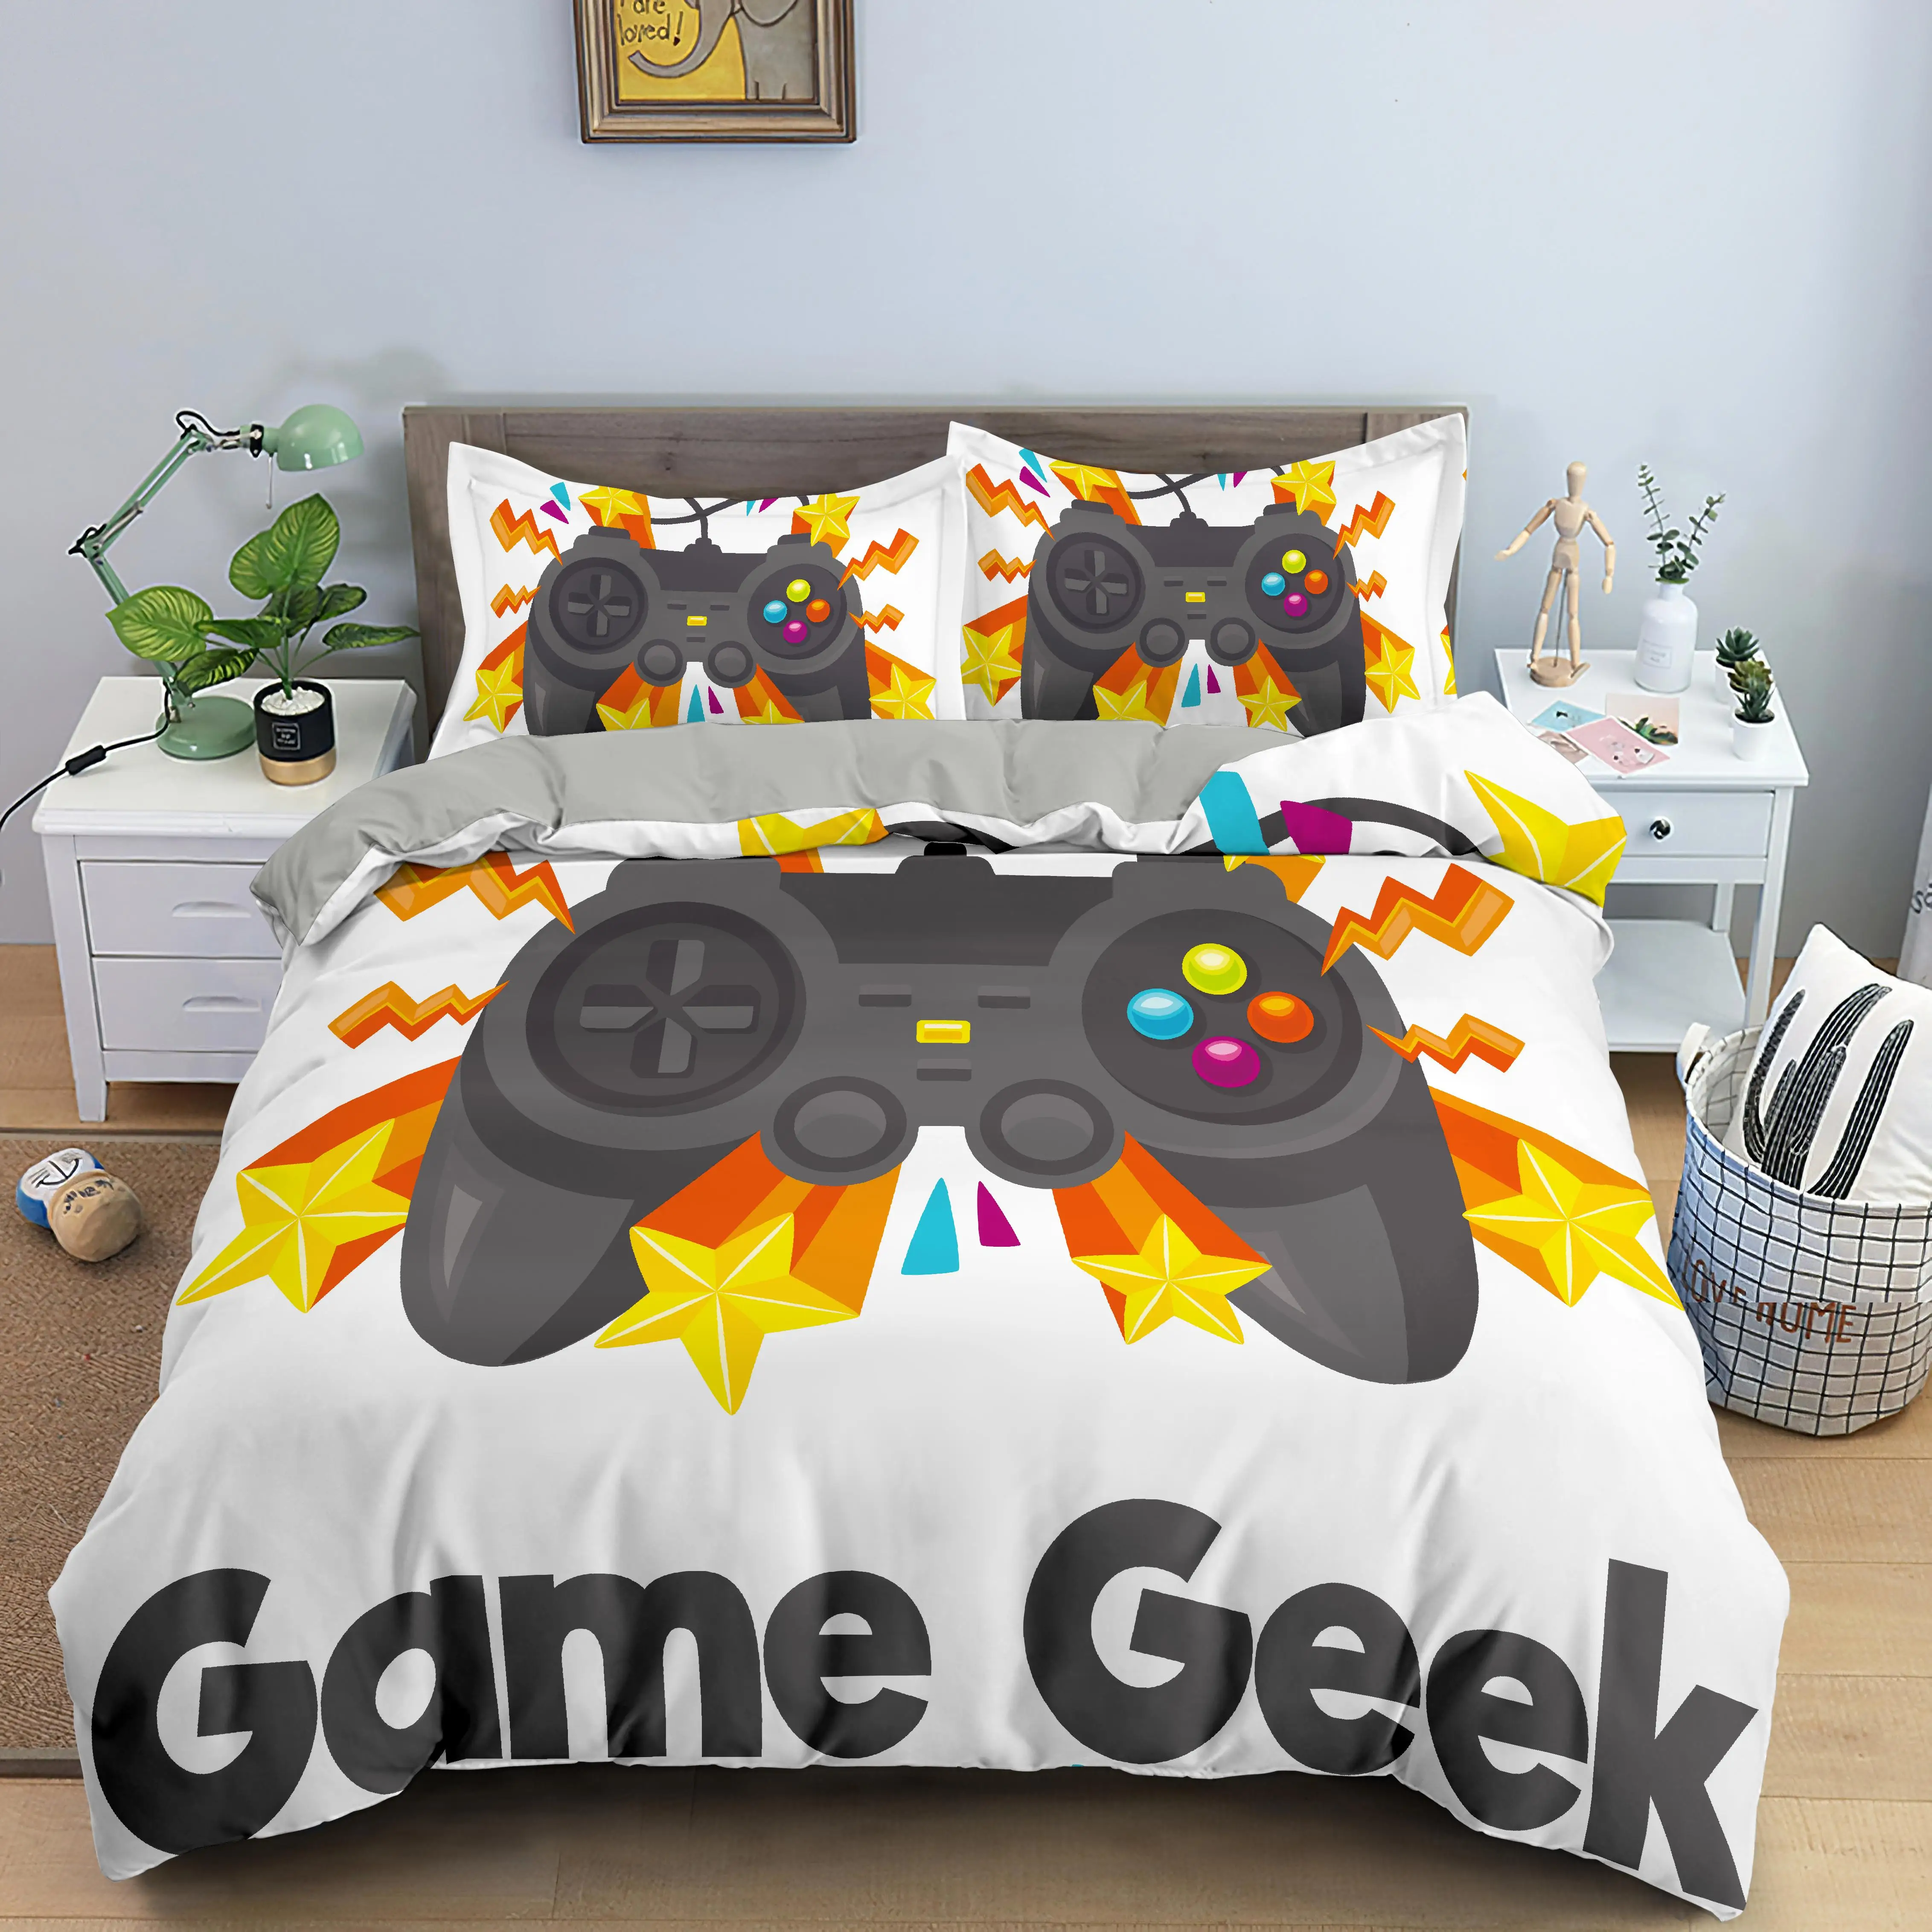 Bedding Set Colourfull Gaming Logo with Star Duvet Cover Bed Linen Home Textile Bedclothes Soft Bed Set Queen/King Size for Kid